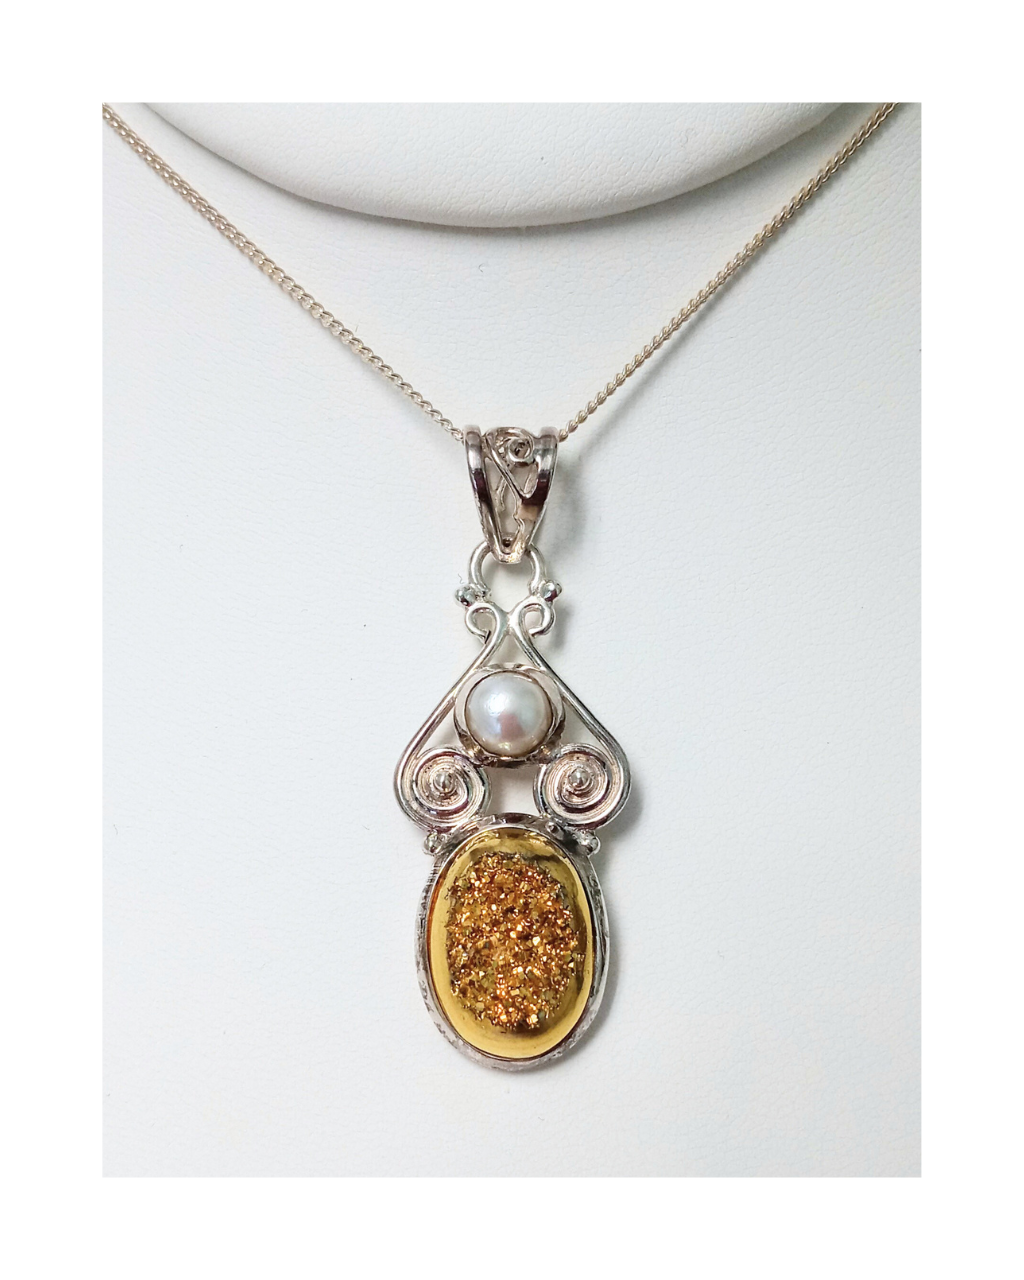 Gorgeous Sterling Gold-colored Druzy Quartz and Pearl Removable Pendant 1 7/8"H X 3/4"W and 16" Curb Chain. ONE ONLY